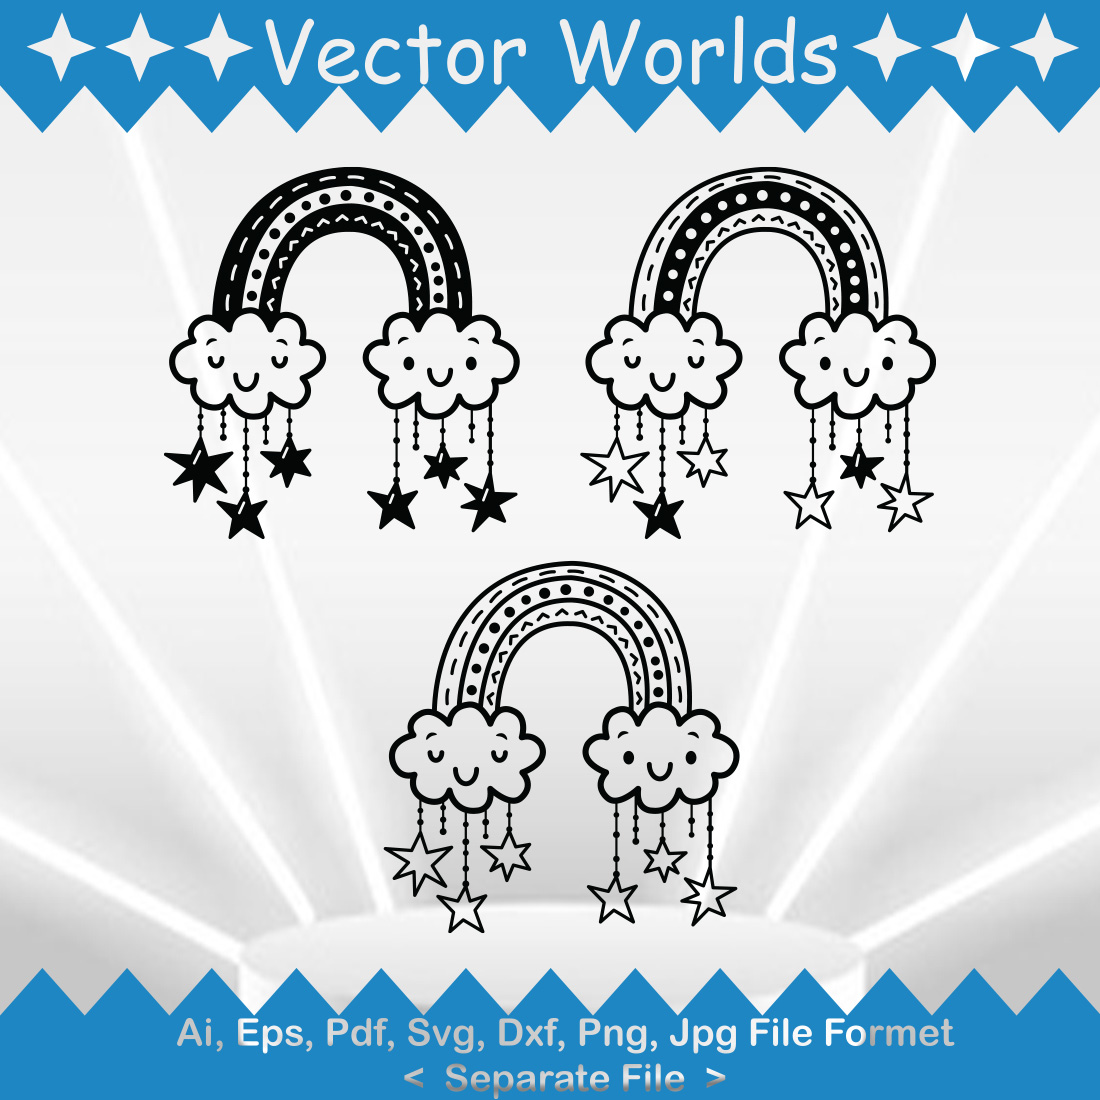 Rainbow Cloud SVG Vector Design cover image.